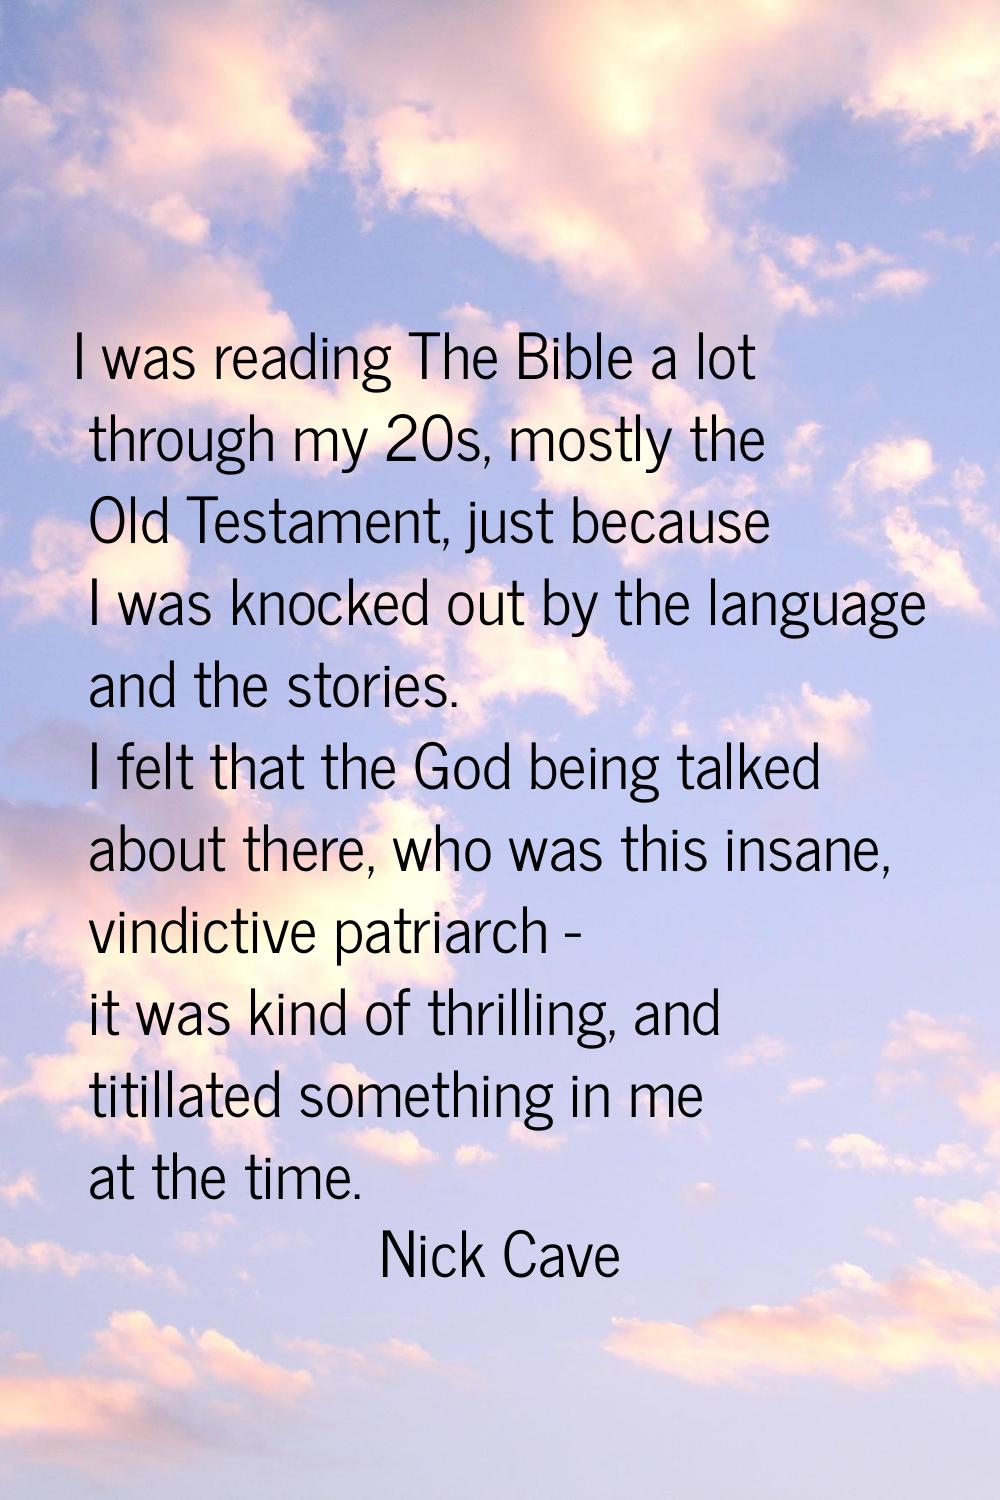 I was reading The Bible a lot through my 20s, mostly the Old Testament, just because I was knocked 